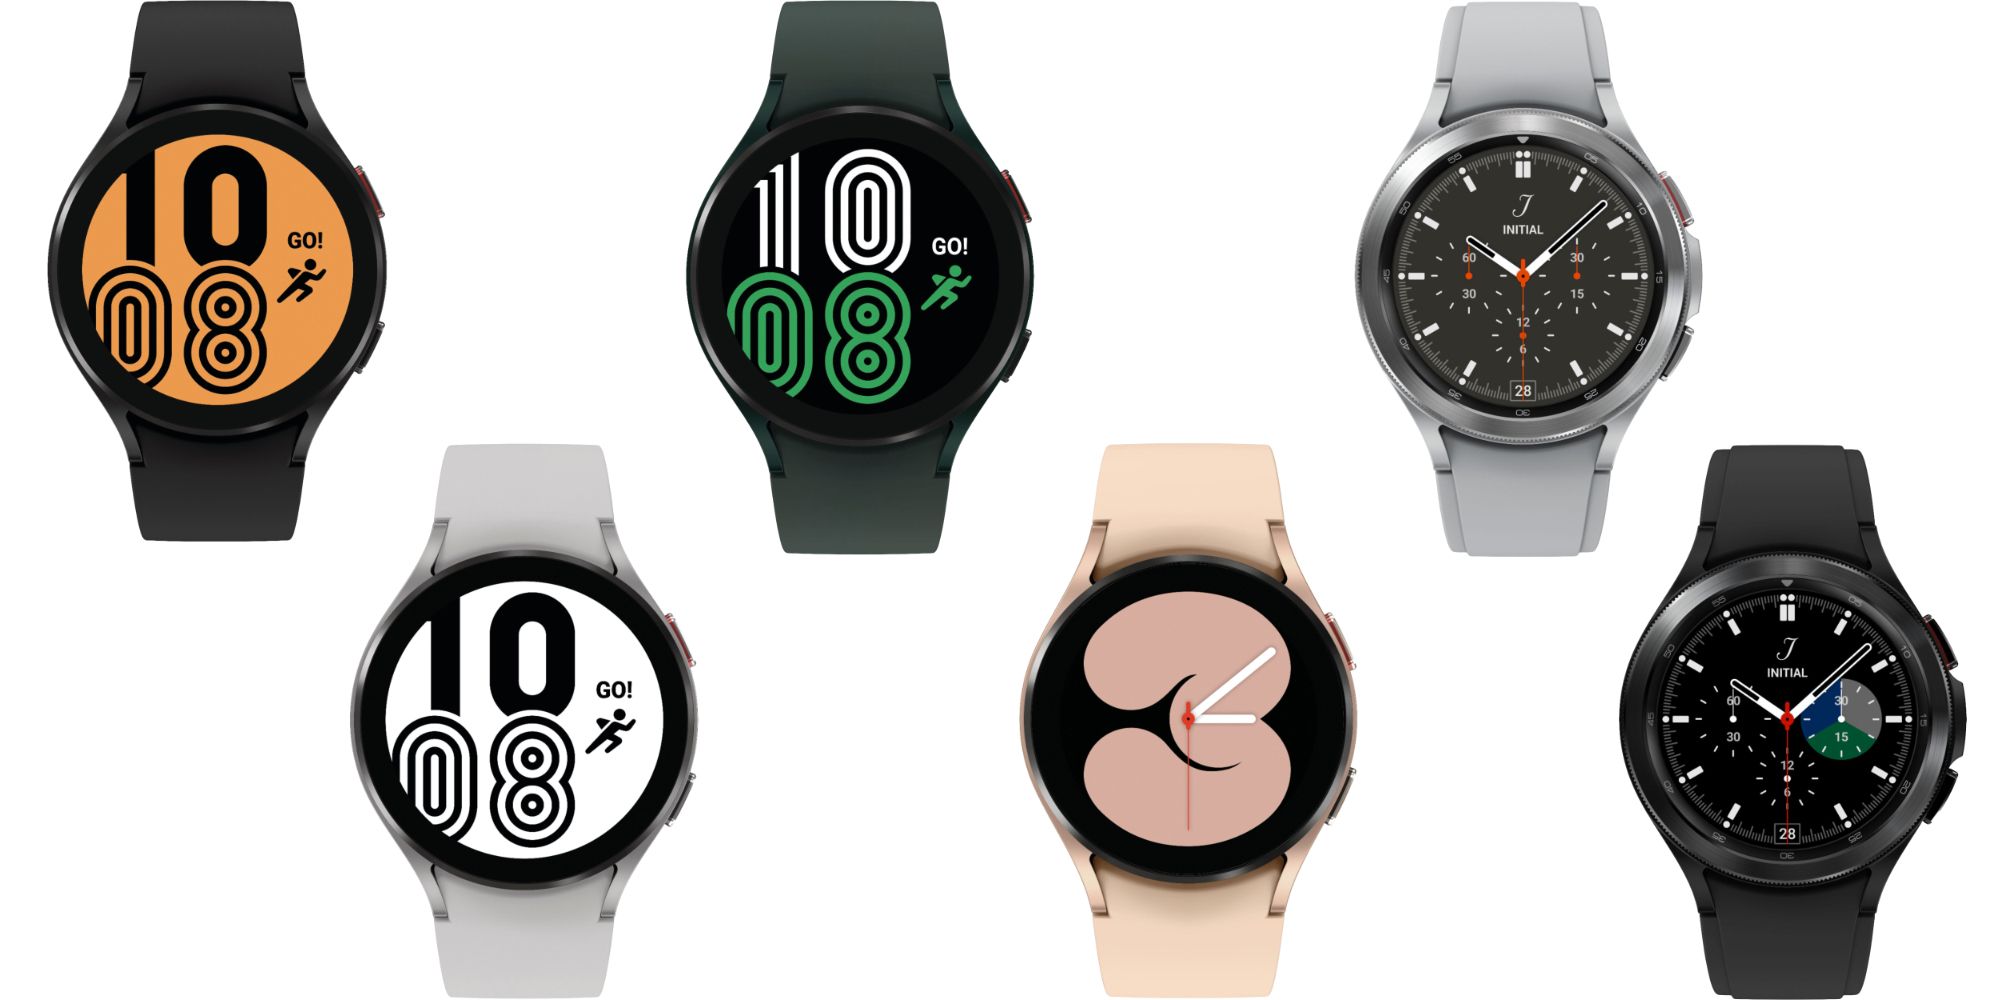 Samsung Galaxy Watch 4 and Watch 4 Classic in all available colors